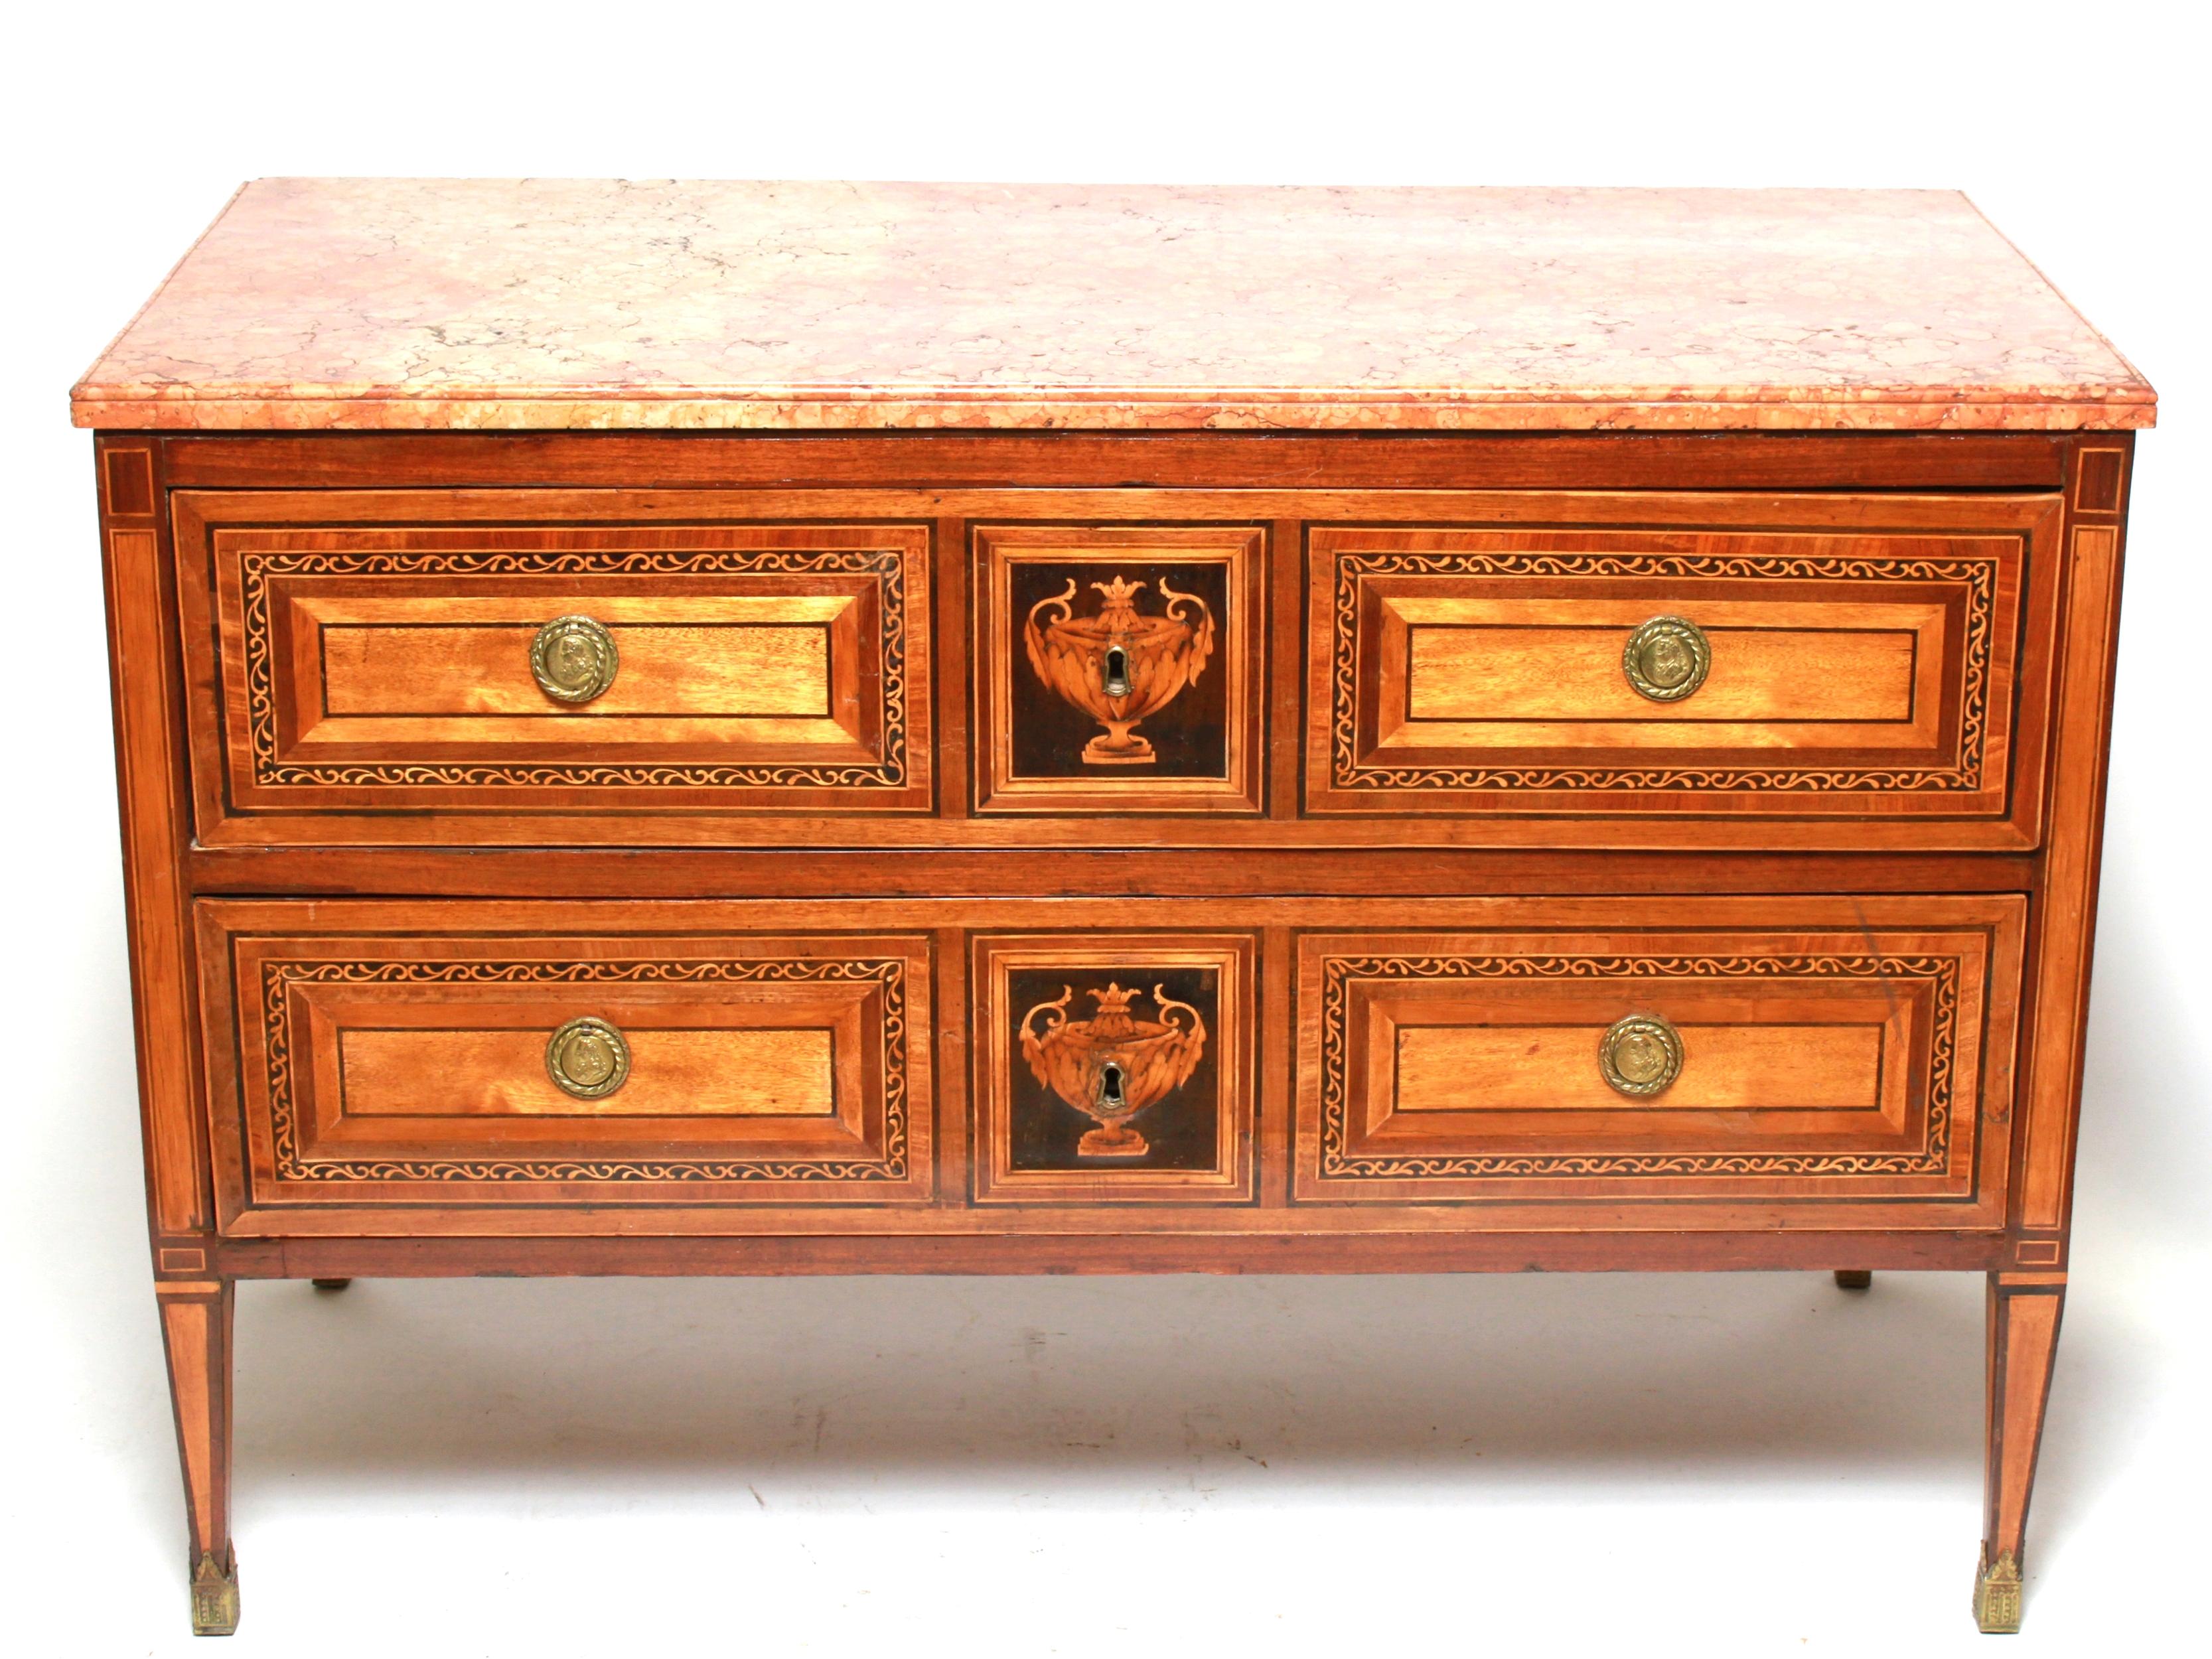 Northern Italian neoclassical pair of commodes with intricate inlay motives of vines and urns, attributed to Italian cabinetmaker Giuseppe Maggiolini. 
The pair was likely made in circa 1800 and has the original antique marble tops. Two large